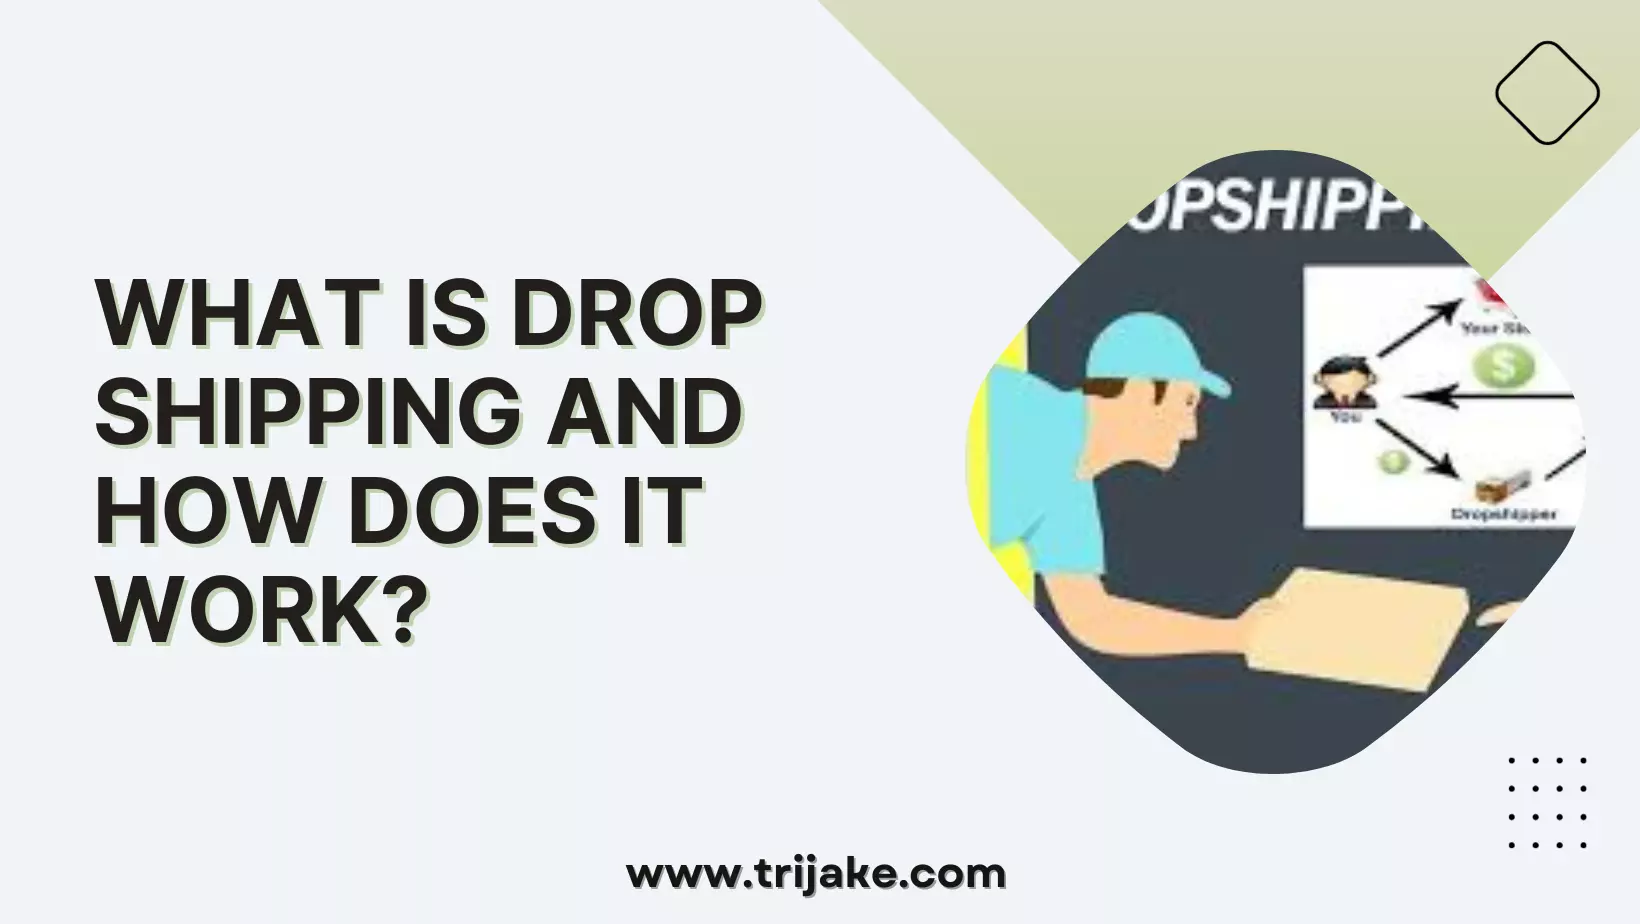 What is Drop Shipping and How Does It Work?